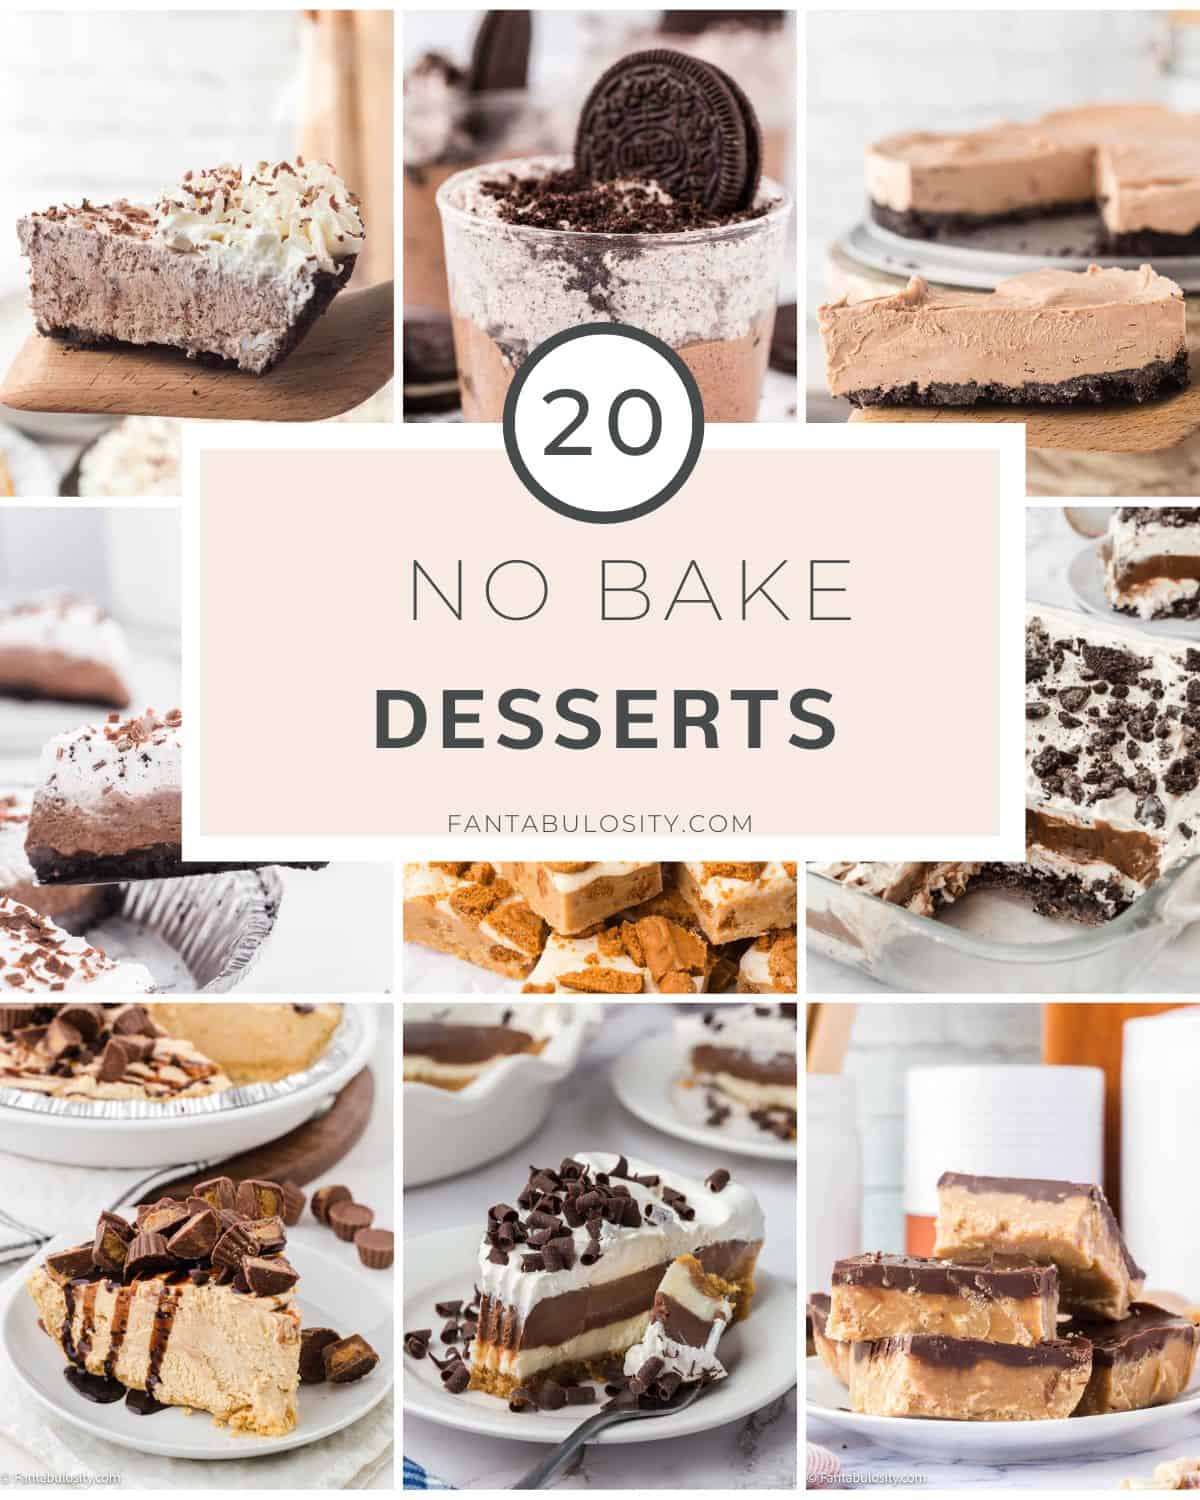 Image collage of no bake desserts with text overlay.